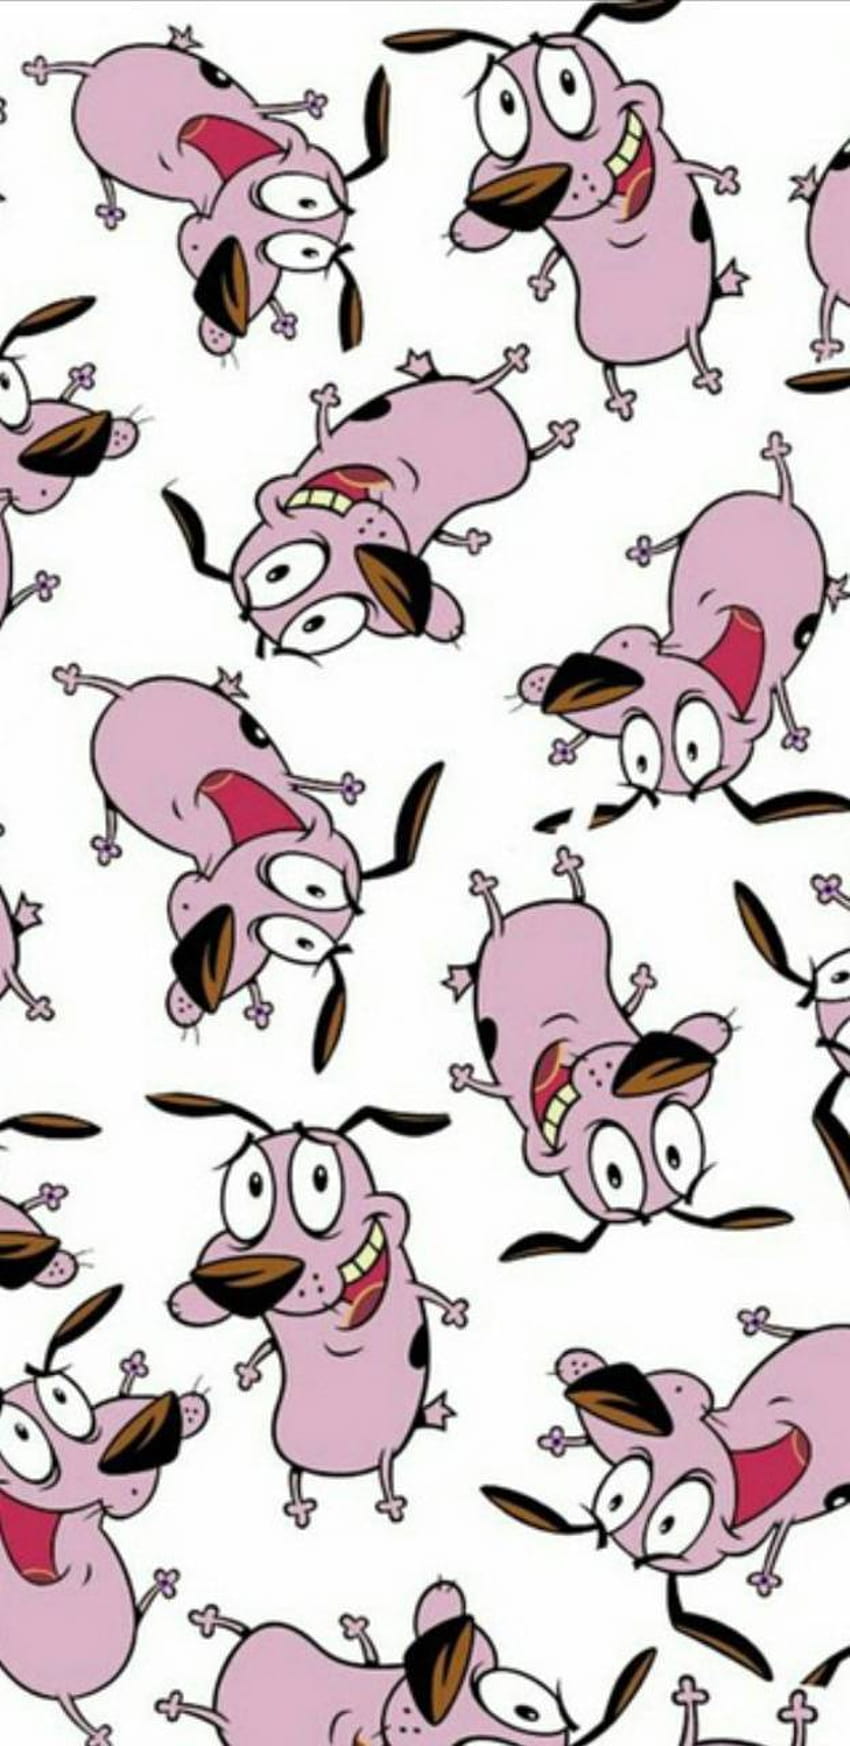 Courage Cowardly Dog by TeenageAnimaStudio, courage the cowardly dog iphone HD phone wallpaper